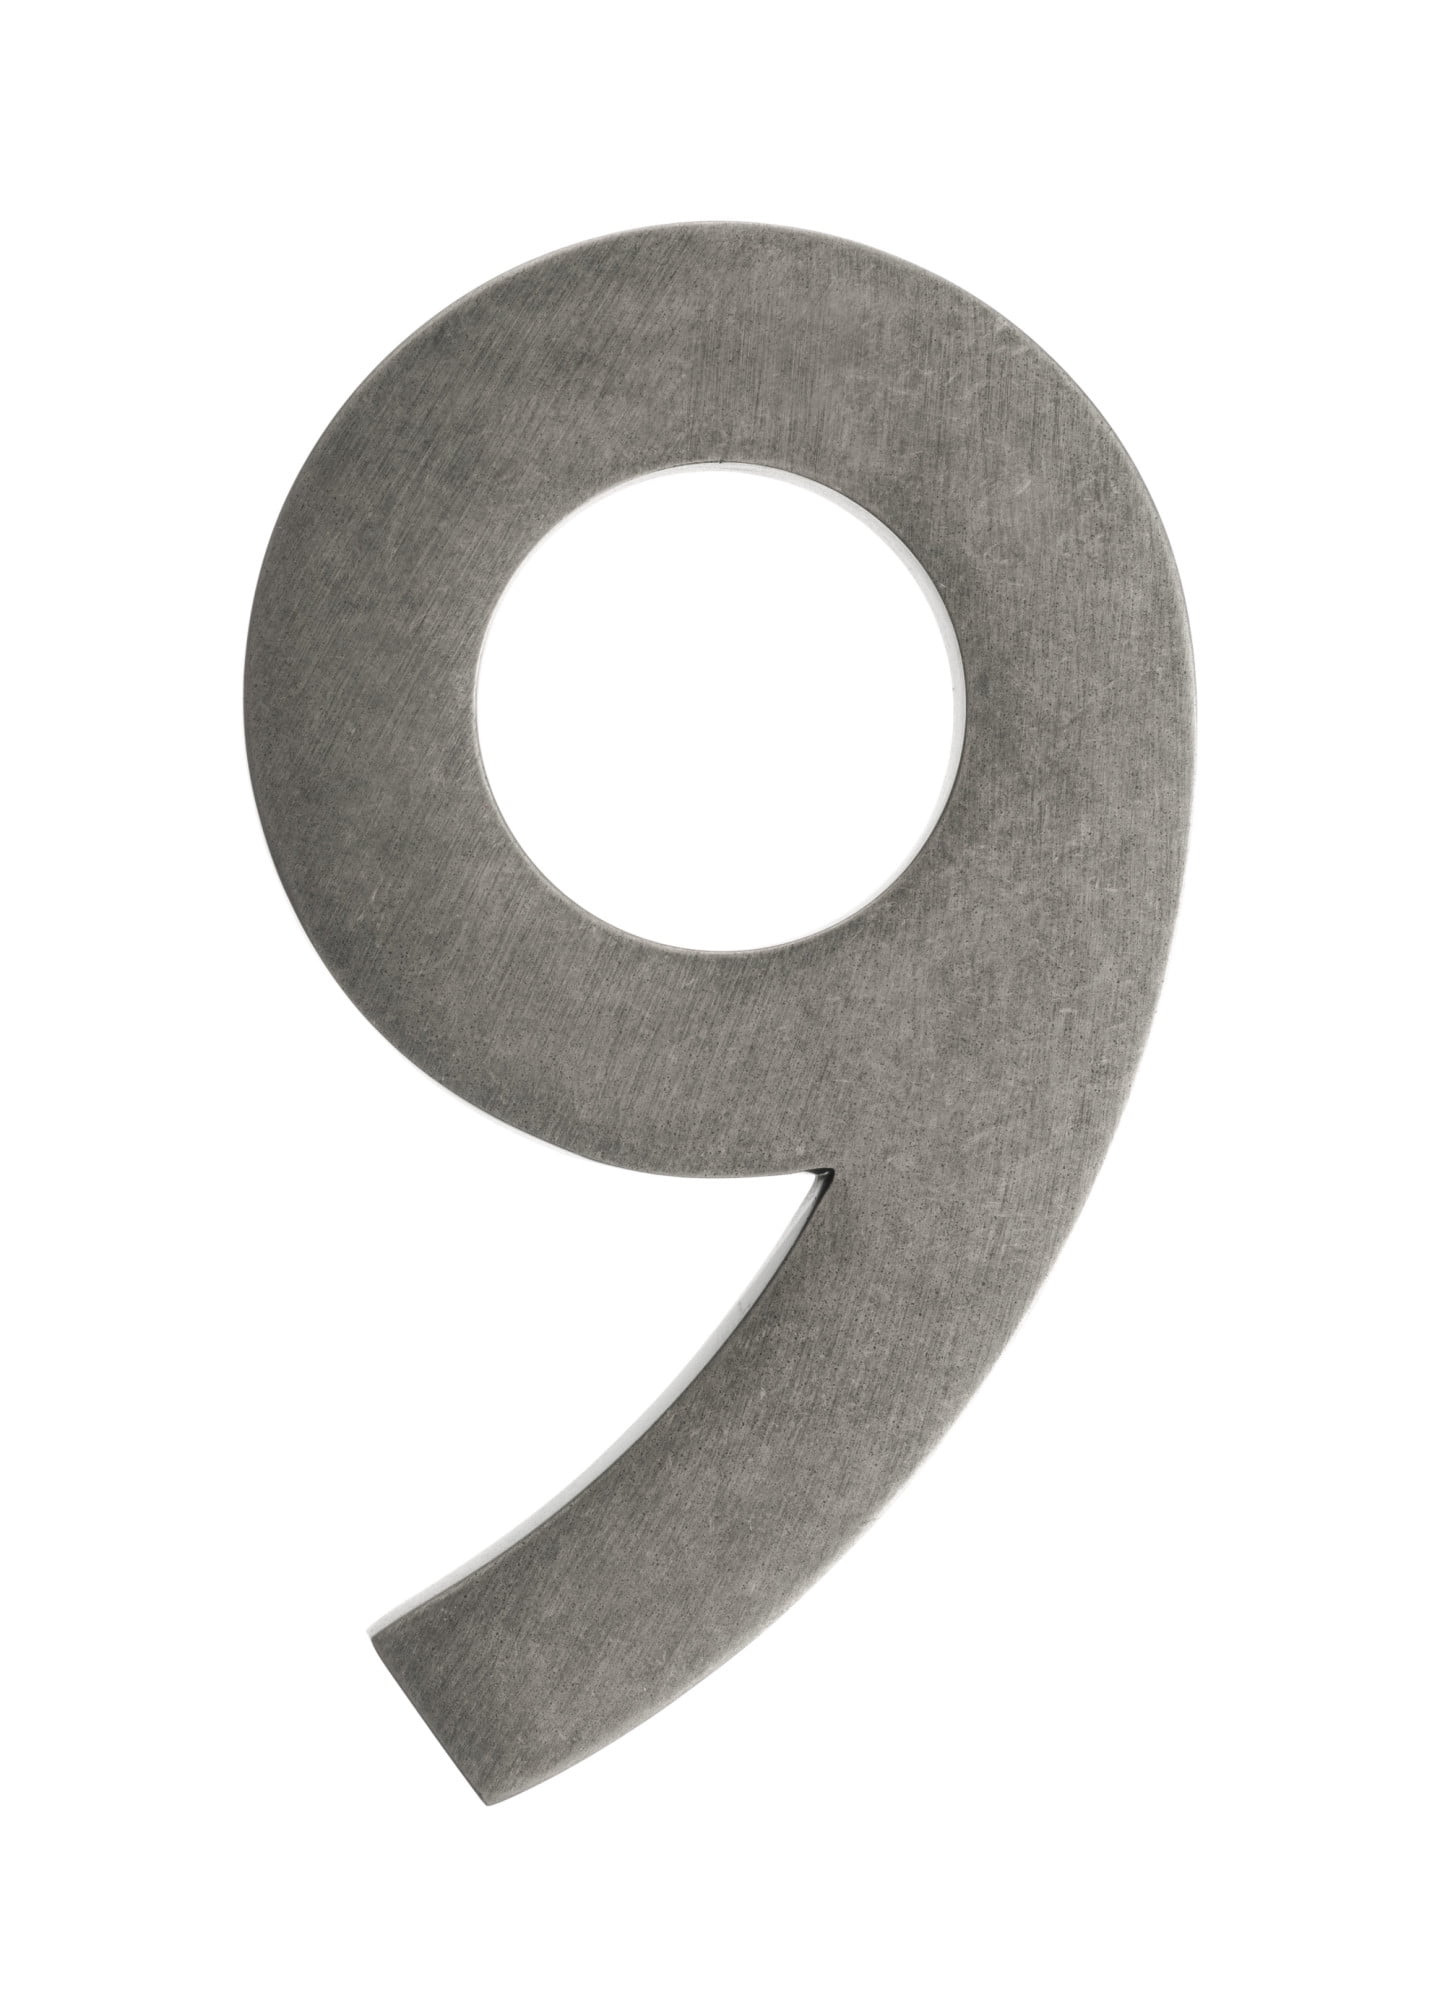 3582apa-9 Floating House Number 9, Antique Pewter - 4 In.